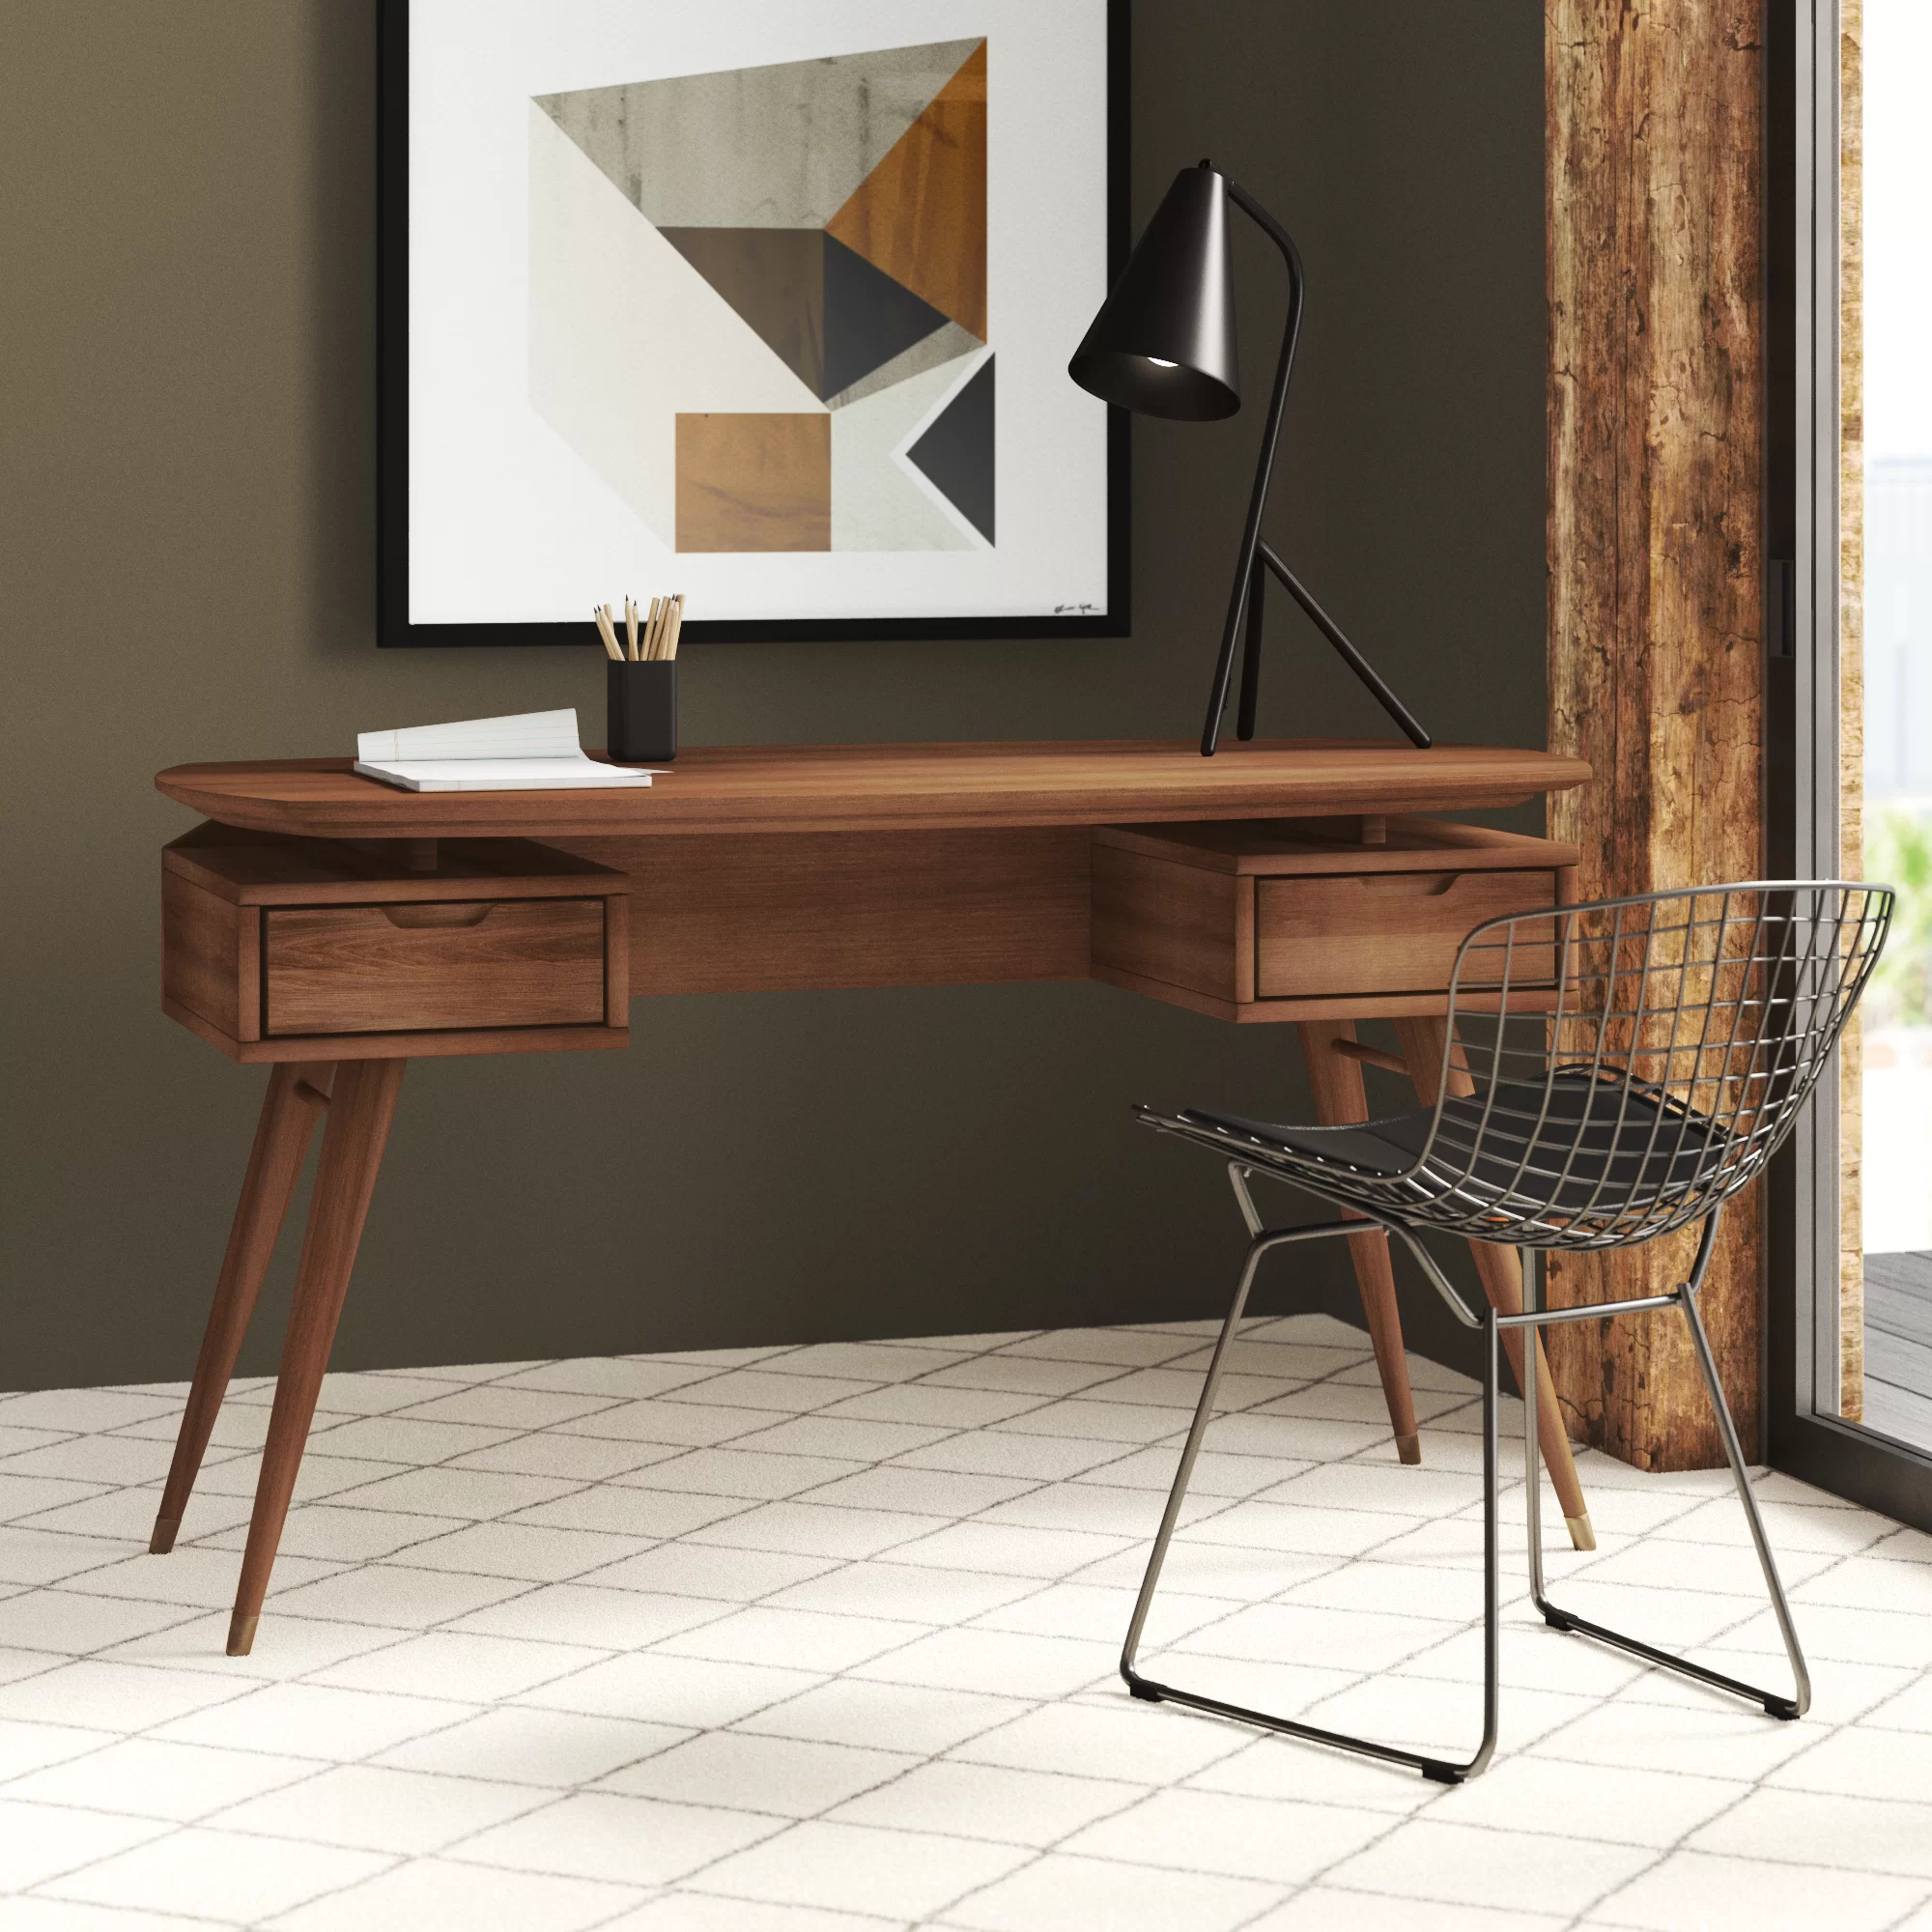 A stylish and comfortable desk for a home office - Nuevo Carel Desk Walnut Stained Poplar Top